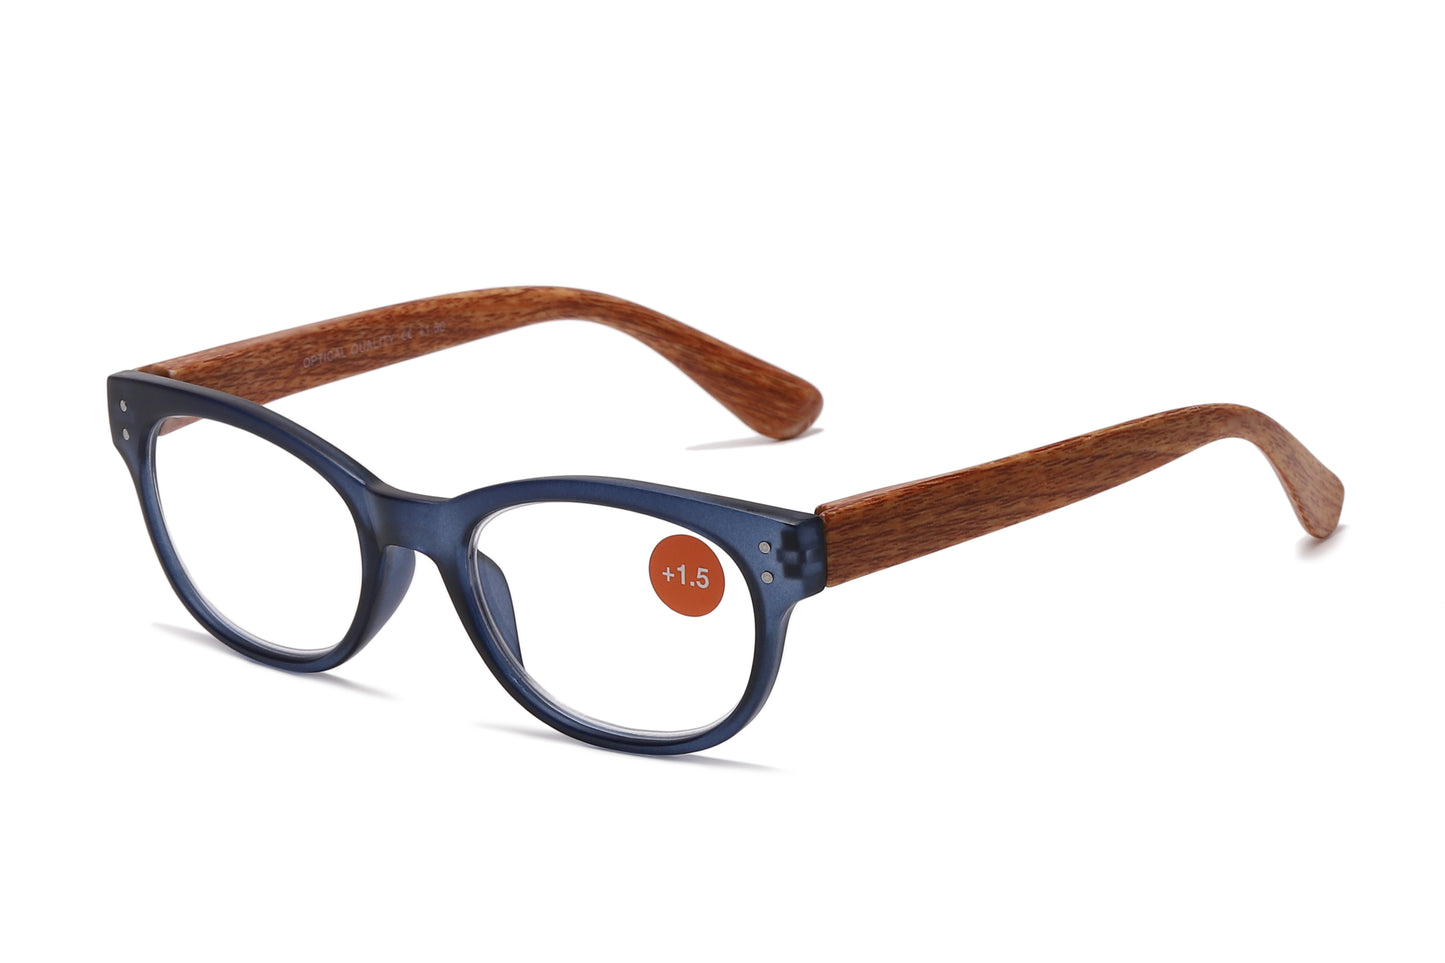 RS 1239 - Oval Reading Glasses with Faux Wood Plastic Temple